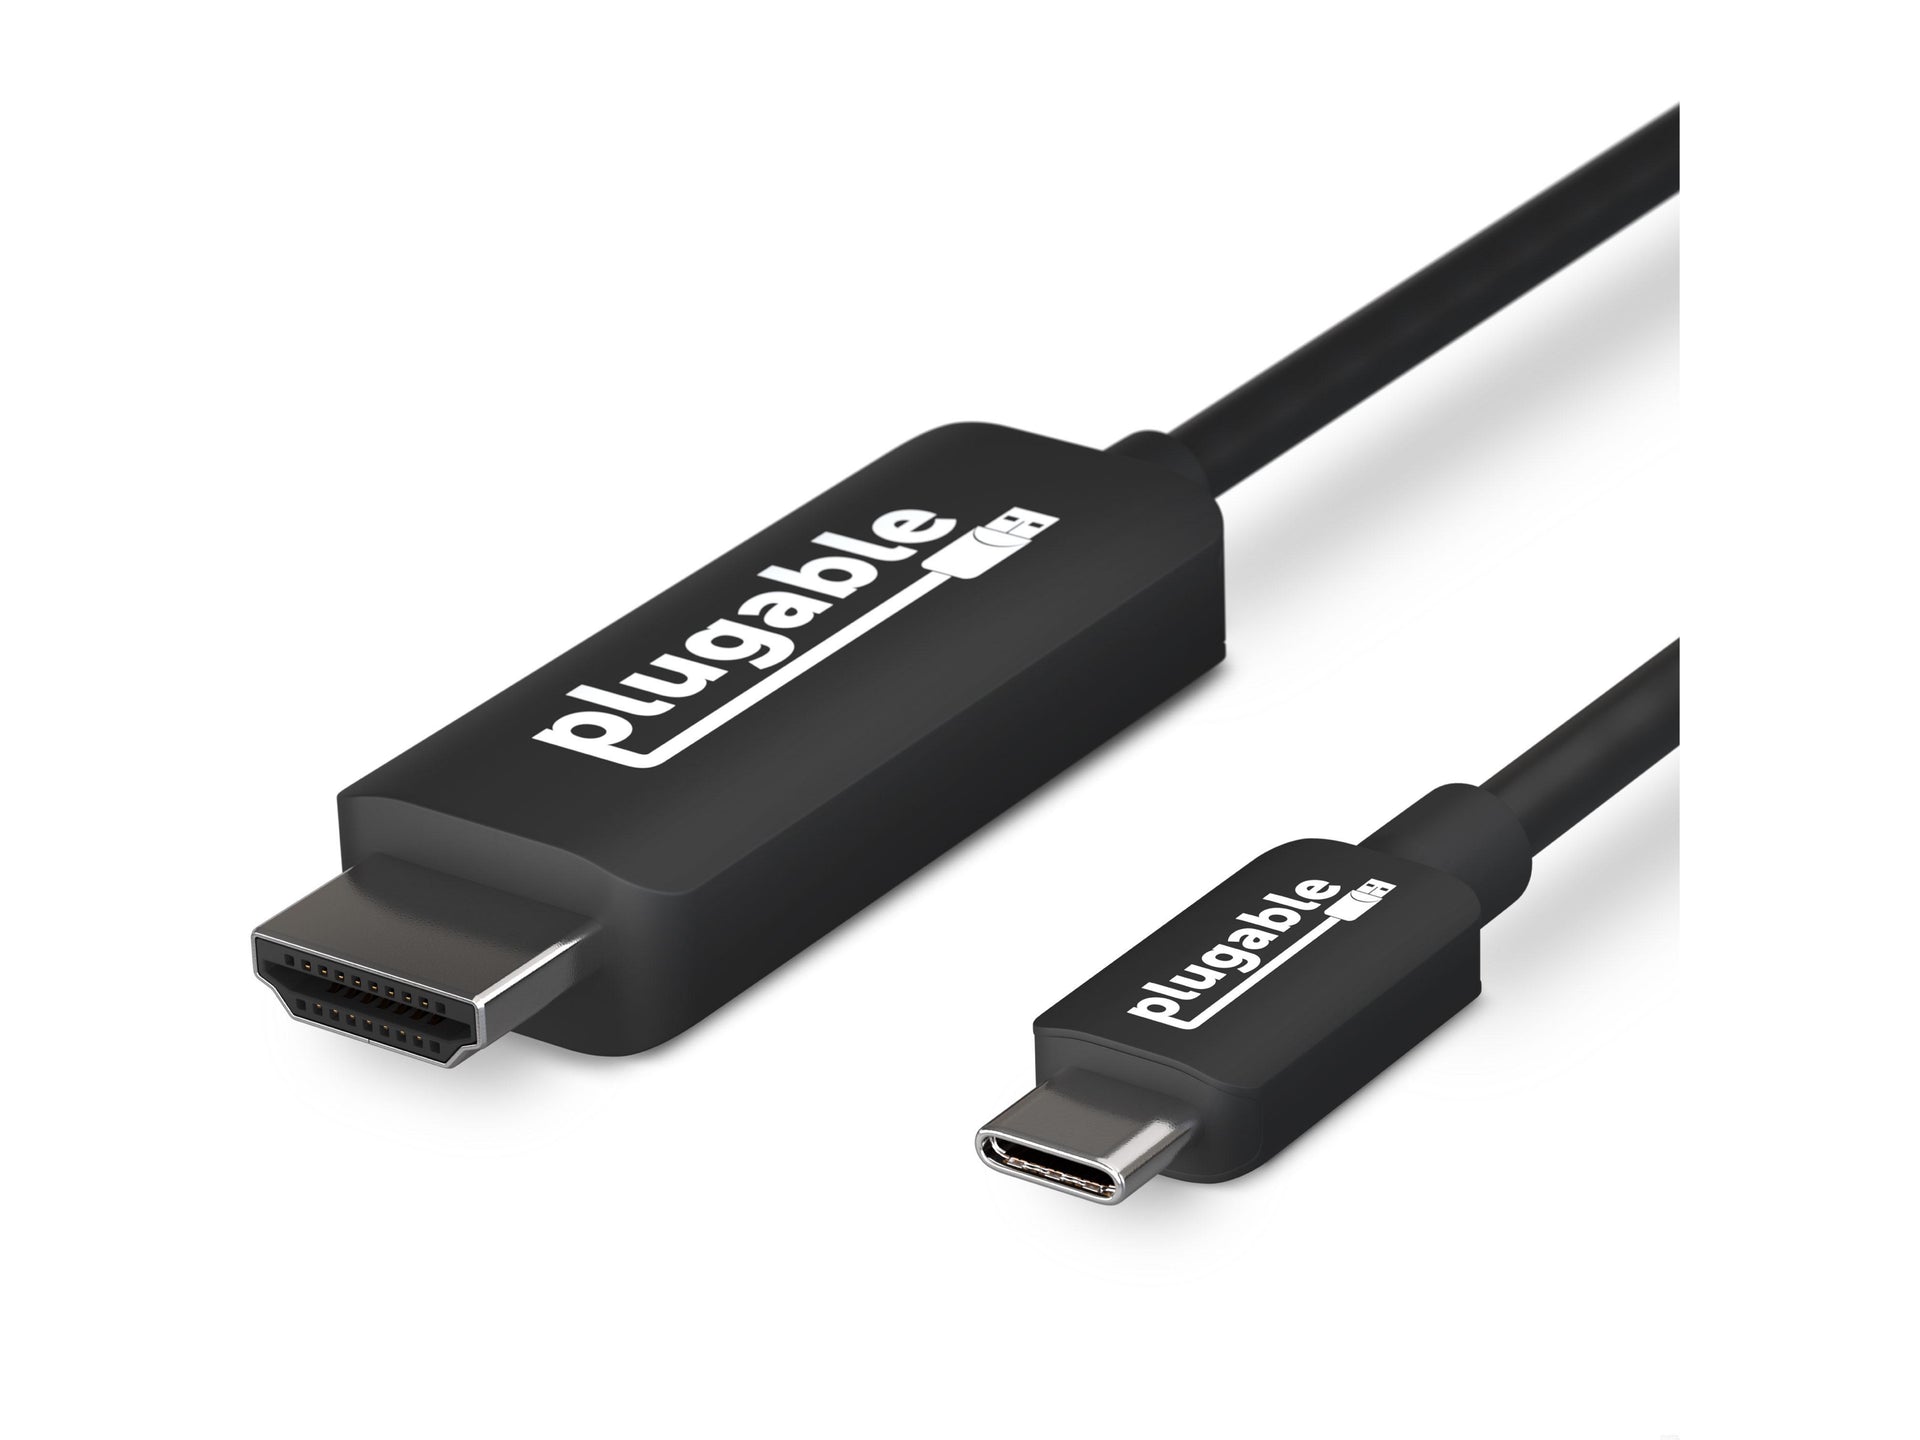 Plugable USB 3.1 Type-C to HDMI 2.0 Cable